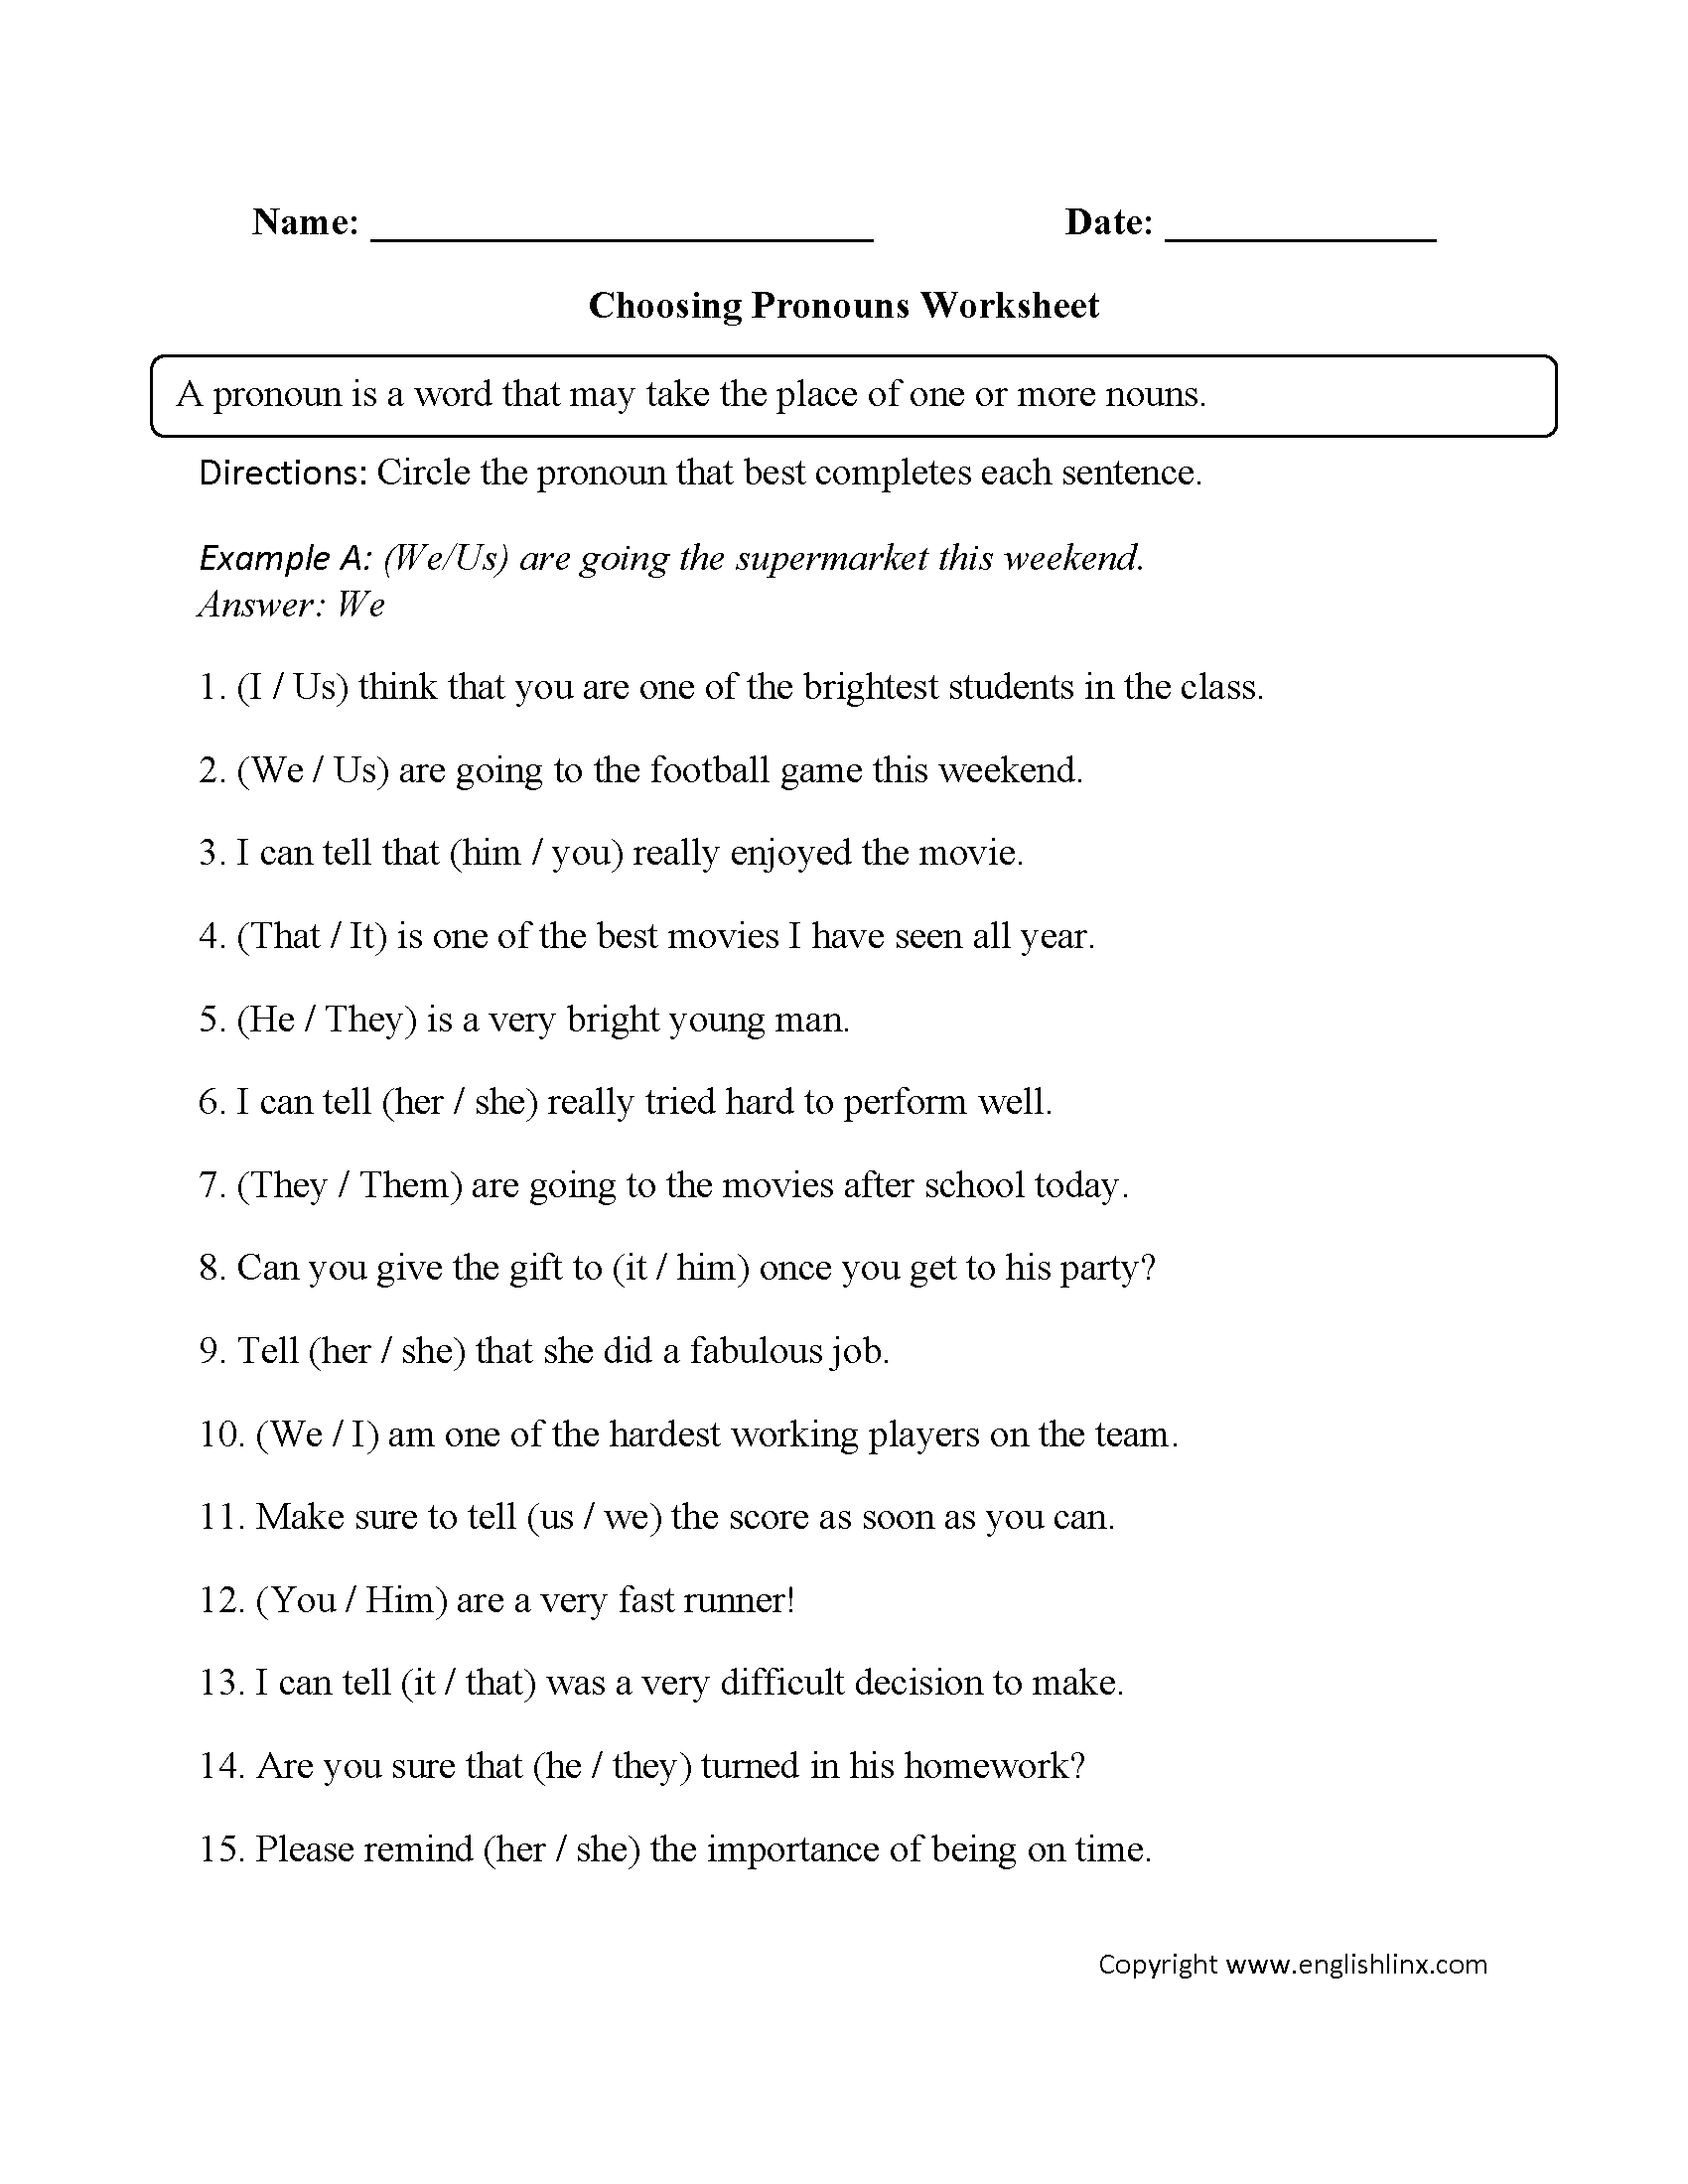 pronouns-and-antecedents-worksheets-db-excel